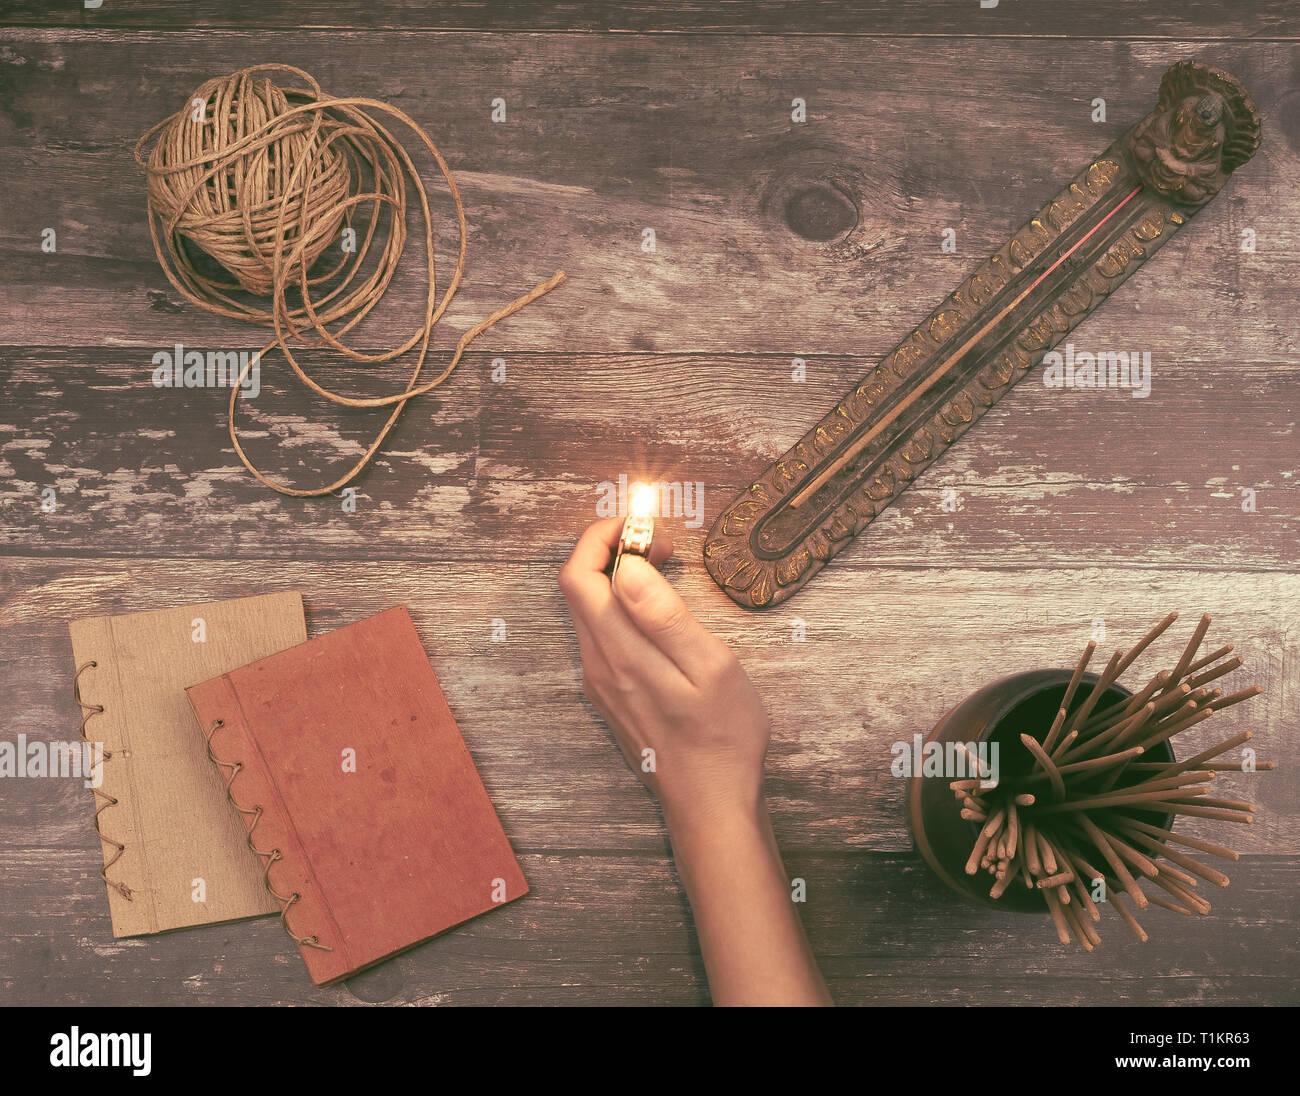 Woman hand lights an incense stick from a Buddha holder on a vintage natural wooden surface with books, hemp twine and many aromatic incense sticks Stock Photo